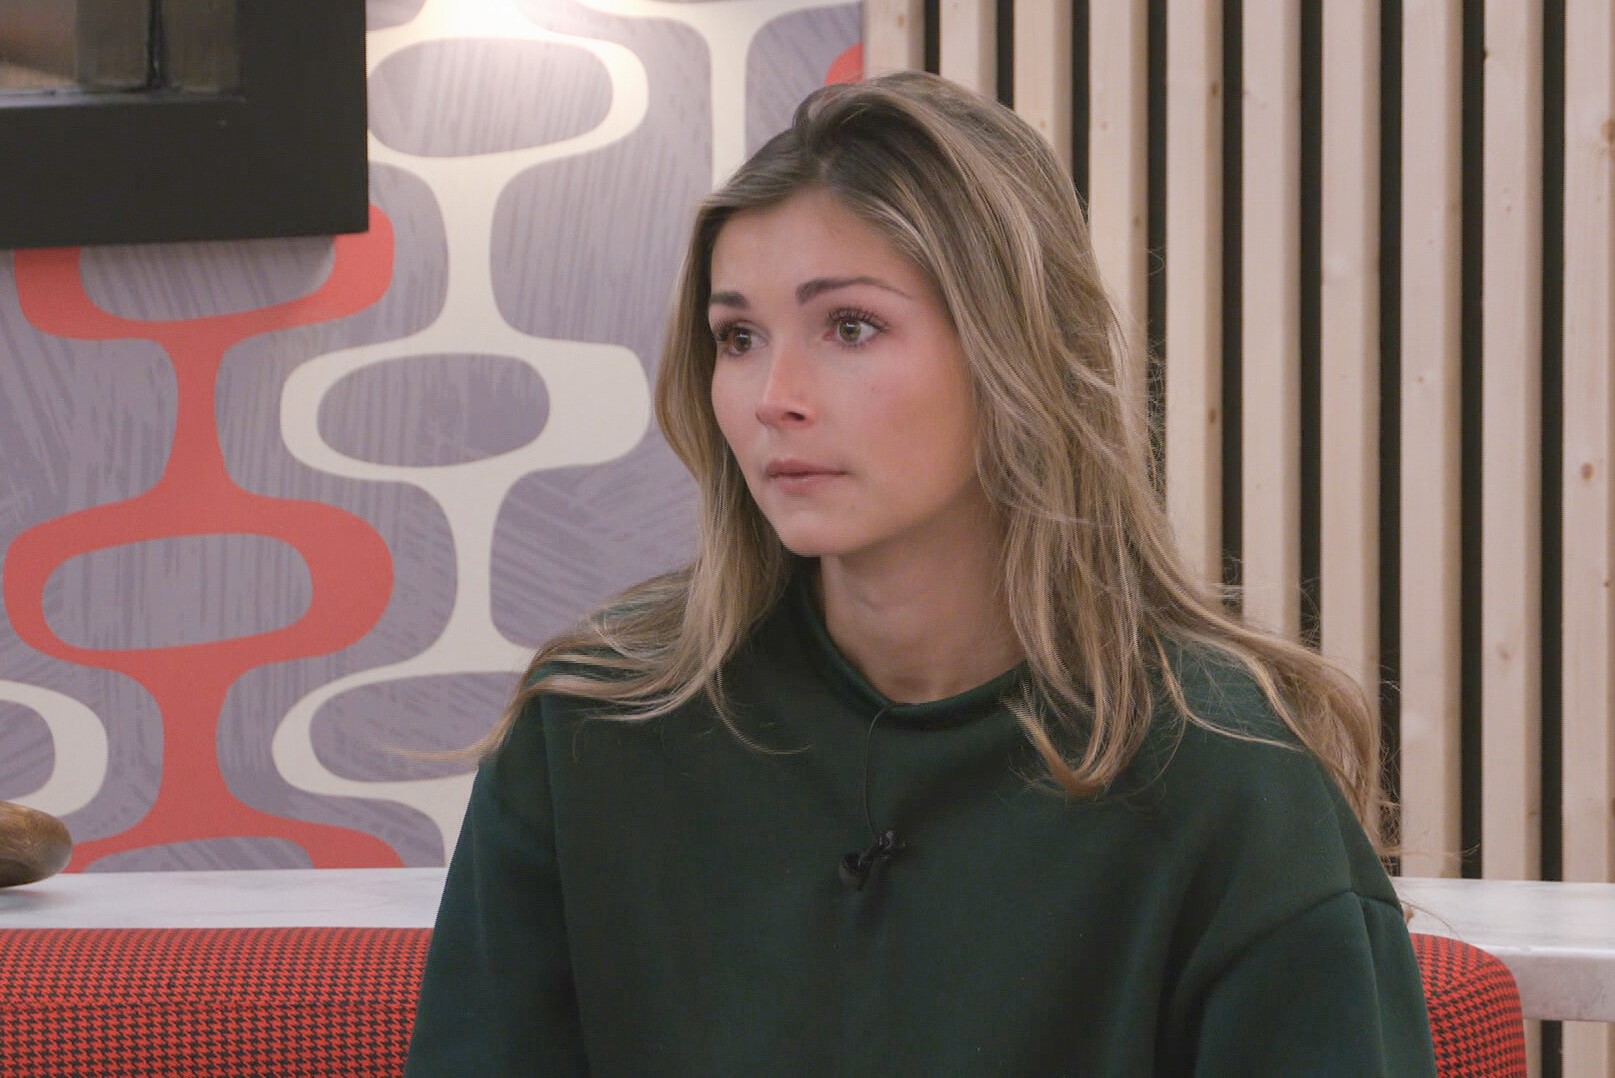 Alyssa Snider, who, according to 'Big Brother 24' spoilers, was nominated for eviction during week nine, wears a dark green sweater.